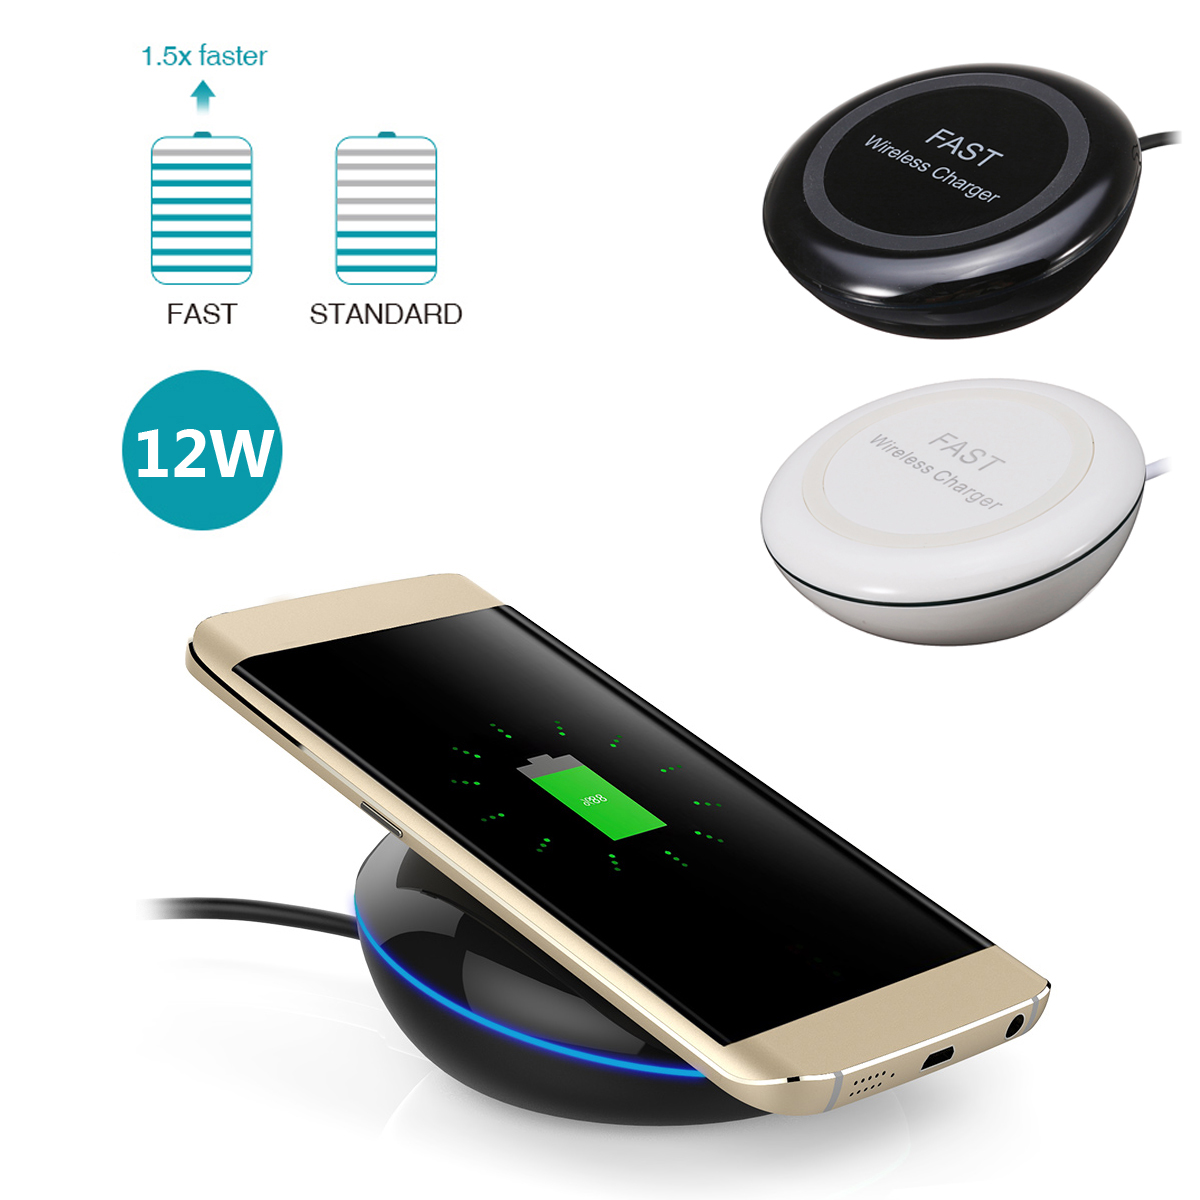 Bakeey-Qi-Wireless-Fast-Charger-With-LED-Indicator-For-iPhone-X-8Plus-Samsung-S7-S8-Note-8-1217829-2